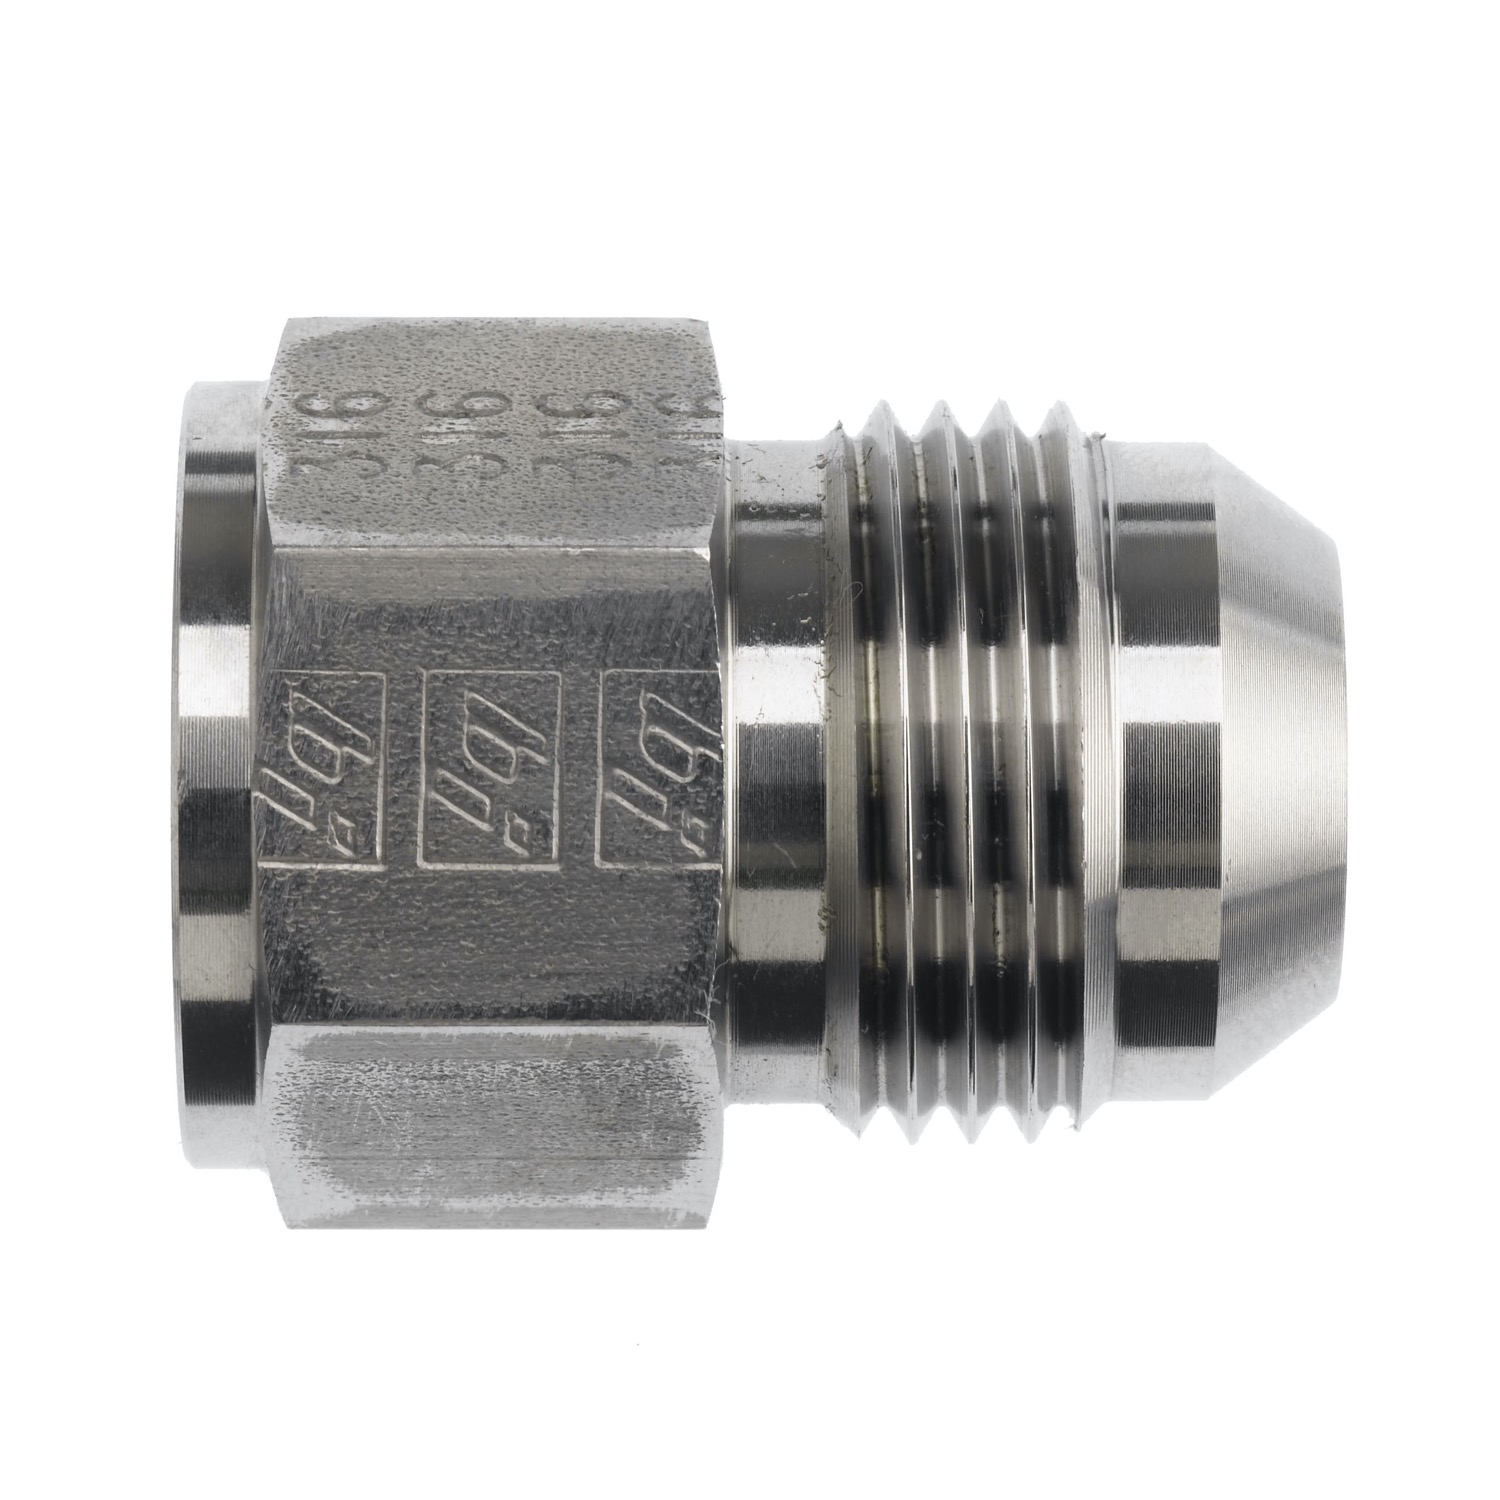 Hydraulic Hose Adapters - Straight Reducer Fitting, JIC 37° Flare, 2406 Series 2406-14-12